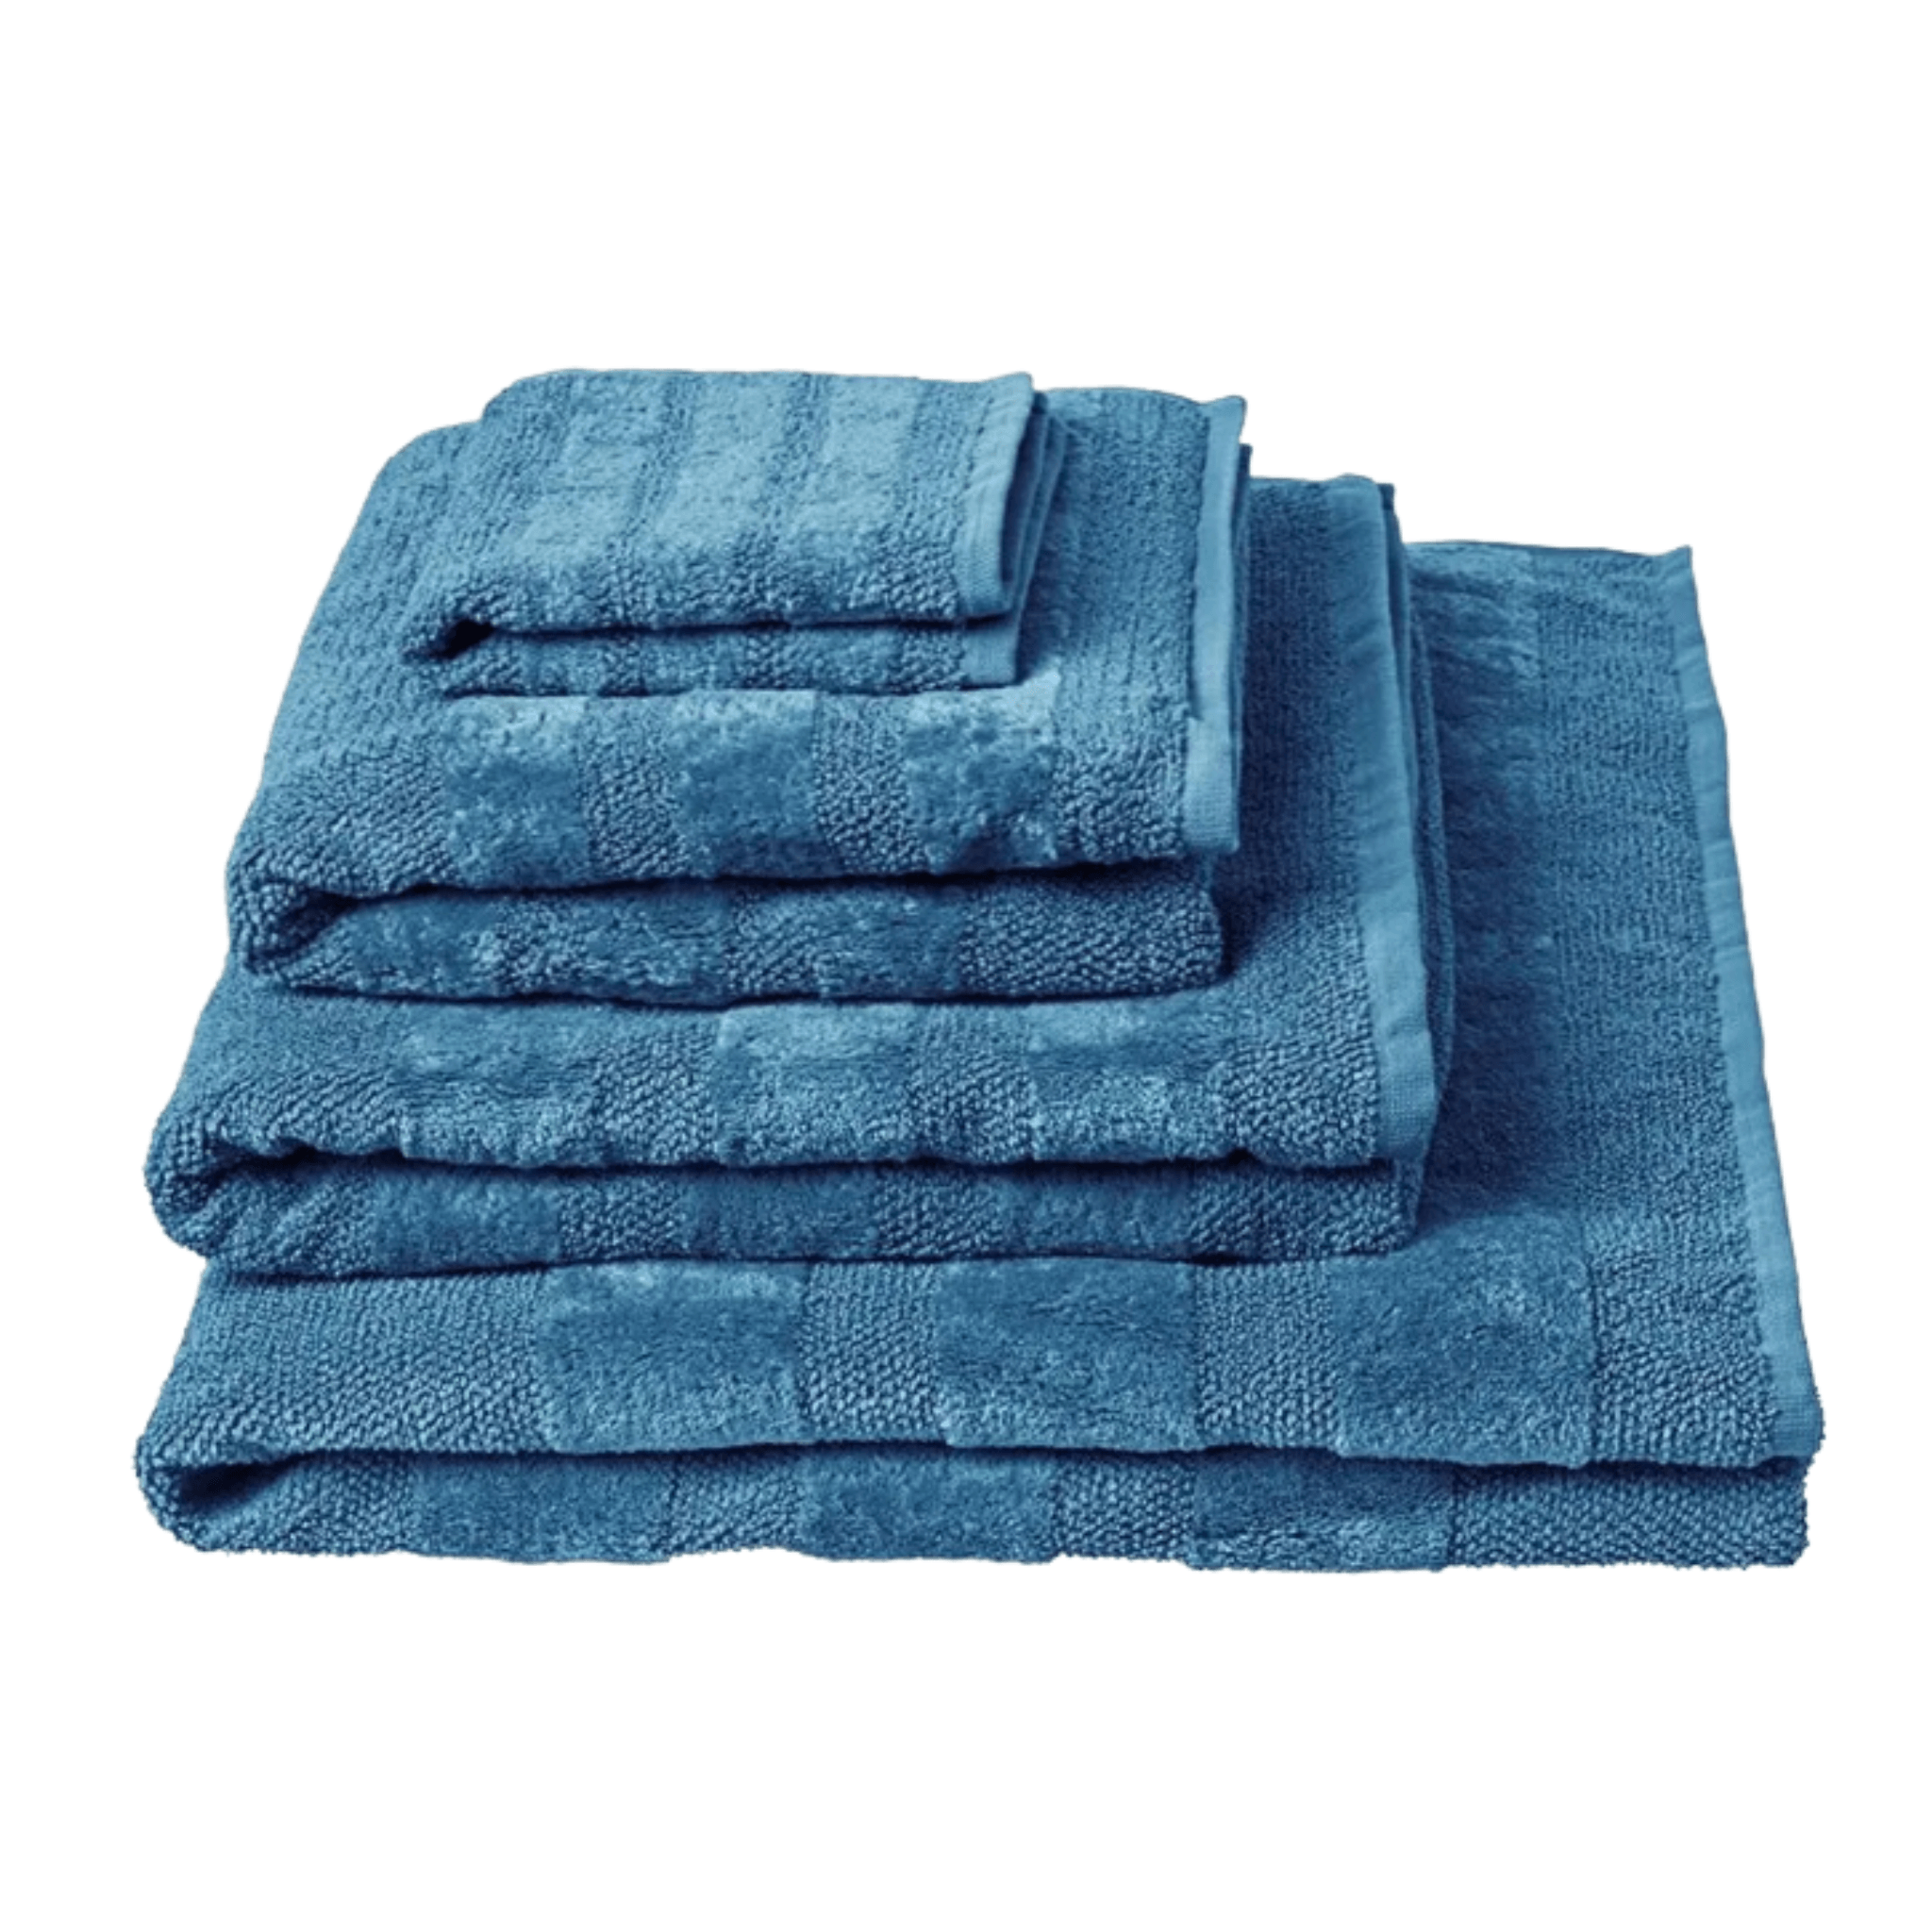 https://www.wellappointedhouse.com/cdn/shop/files/luxurious-100percent-cotton-denim-blue-coniston-towels-bath-towels-the-well-appointed-house-1.png?v=1691700037